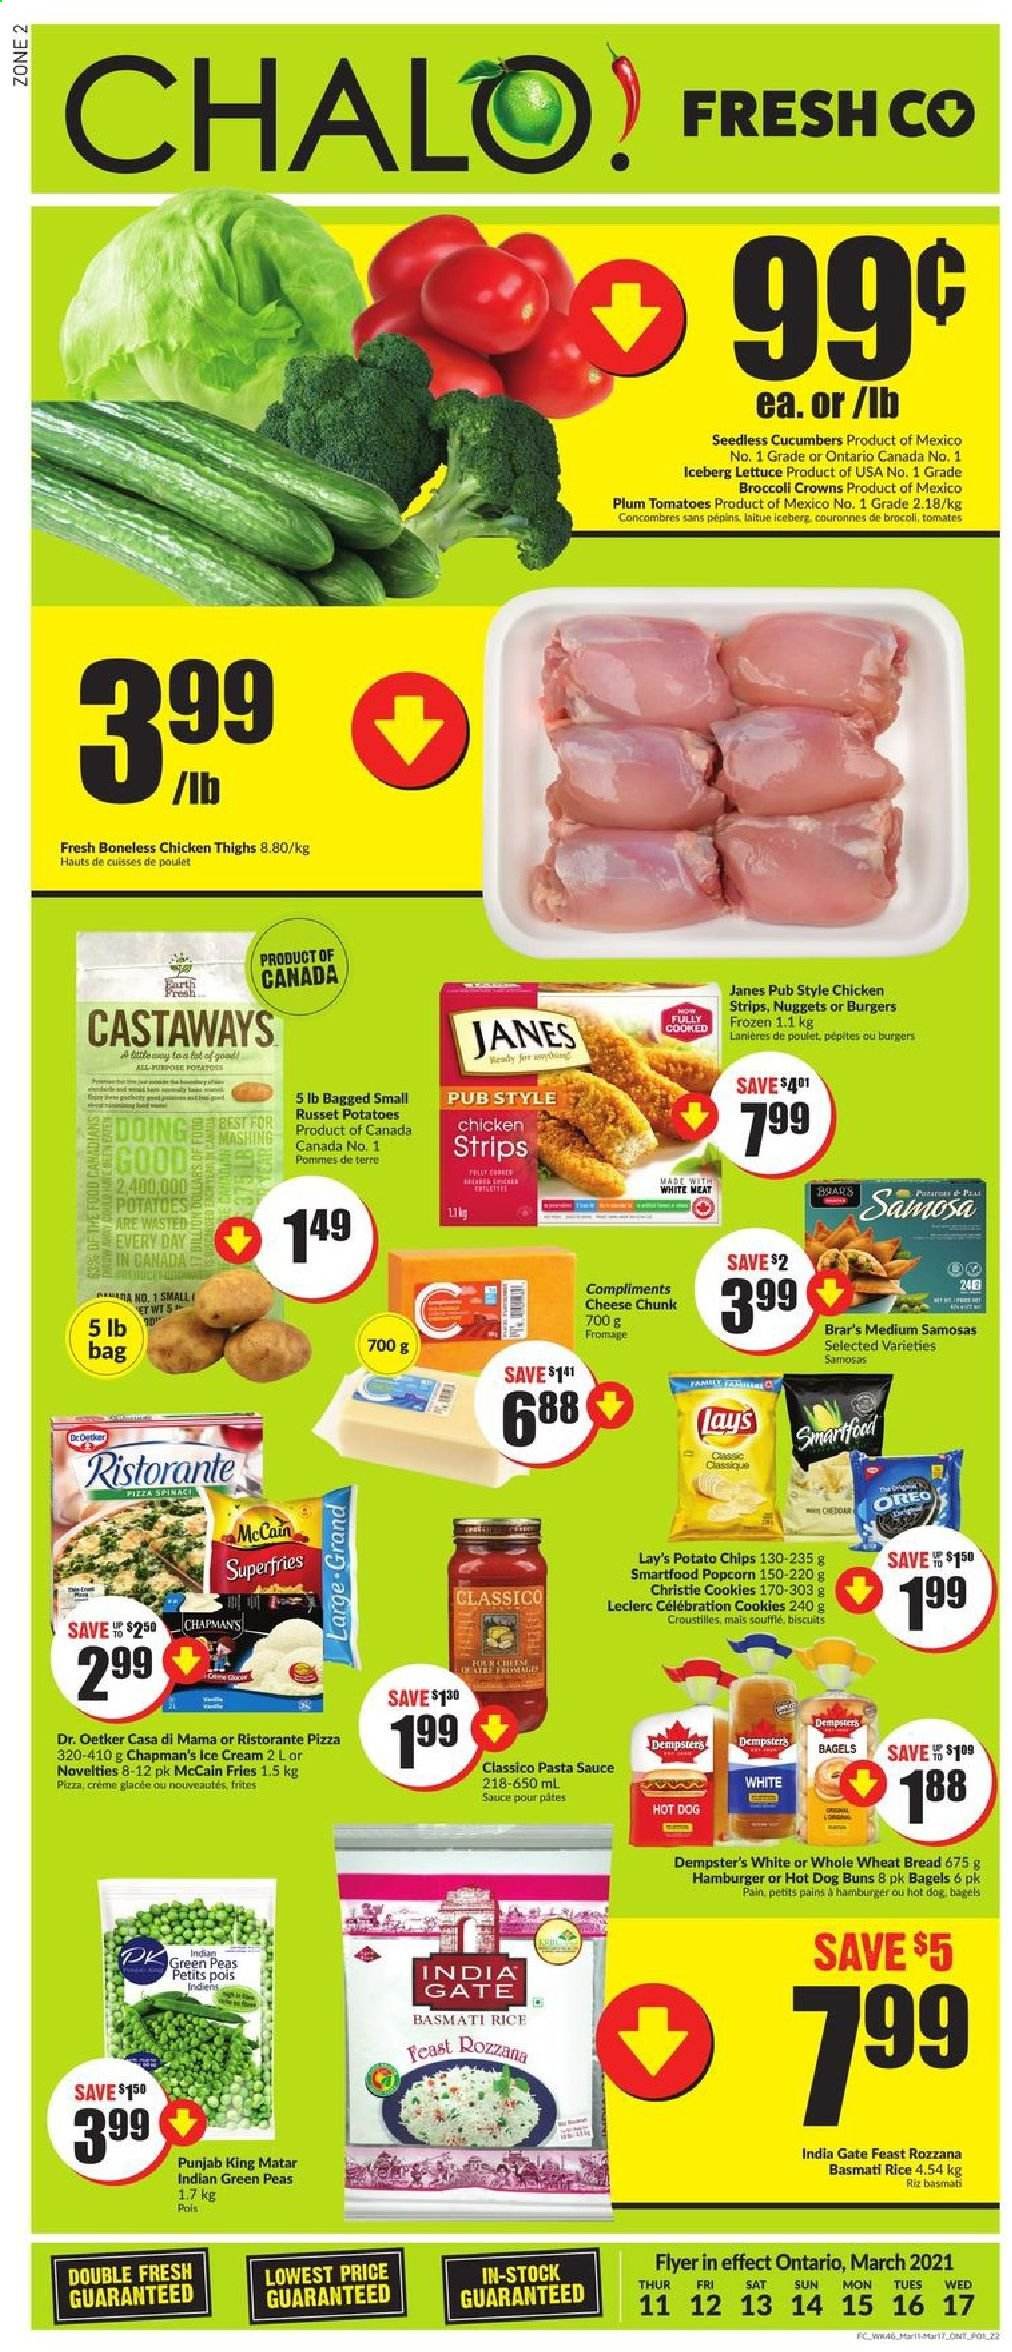 thumbnail - Chalo! FreshCo. Flyer - March 11, 2021 - March 17, 2021 - Sales products - wheat bread, buns, cucumber, russet potatoes, peas, lettuce, pizza, pasta sauce, nuggets, sauce, Dr. Oetker, ice cream, strips, chicken strips, McCain, potato fries, cookies, Celebration, biscuit, potato chips, Lay’s, Smartfood, popcorn, basmati rice, rice, Classico, L'Or, chicken thighs, chicken, Oreo. Page 1.